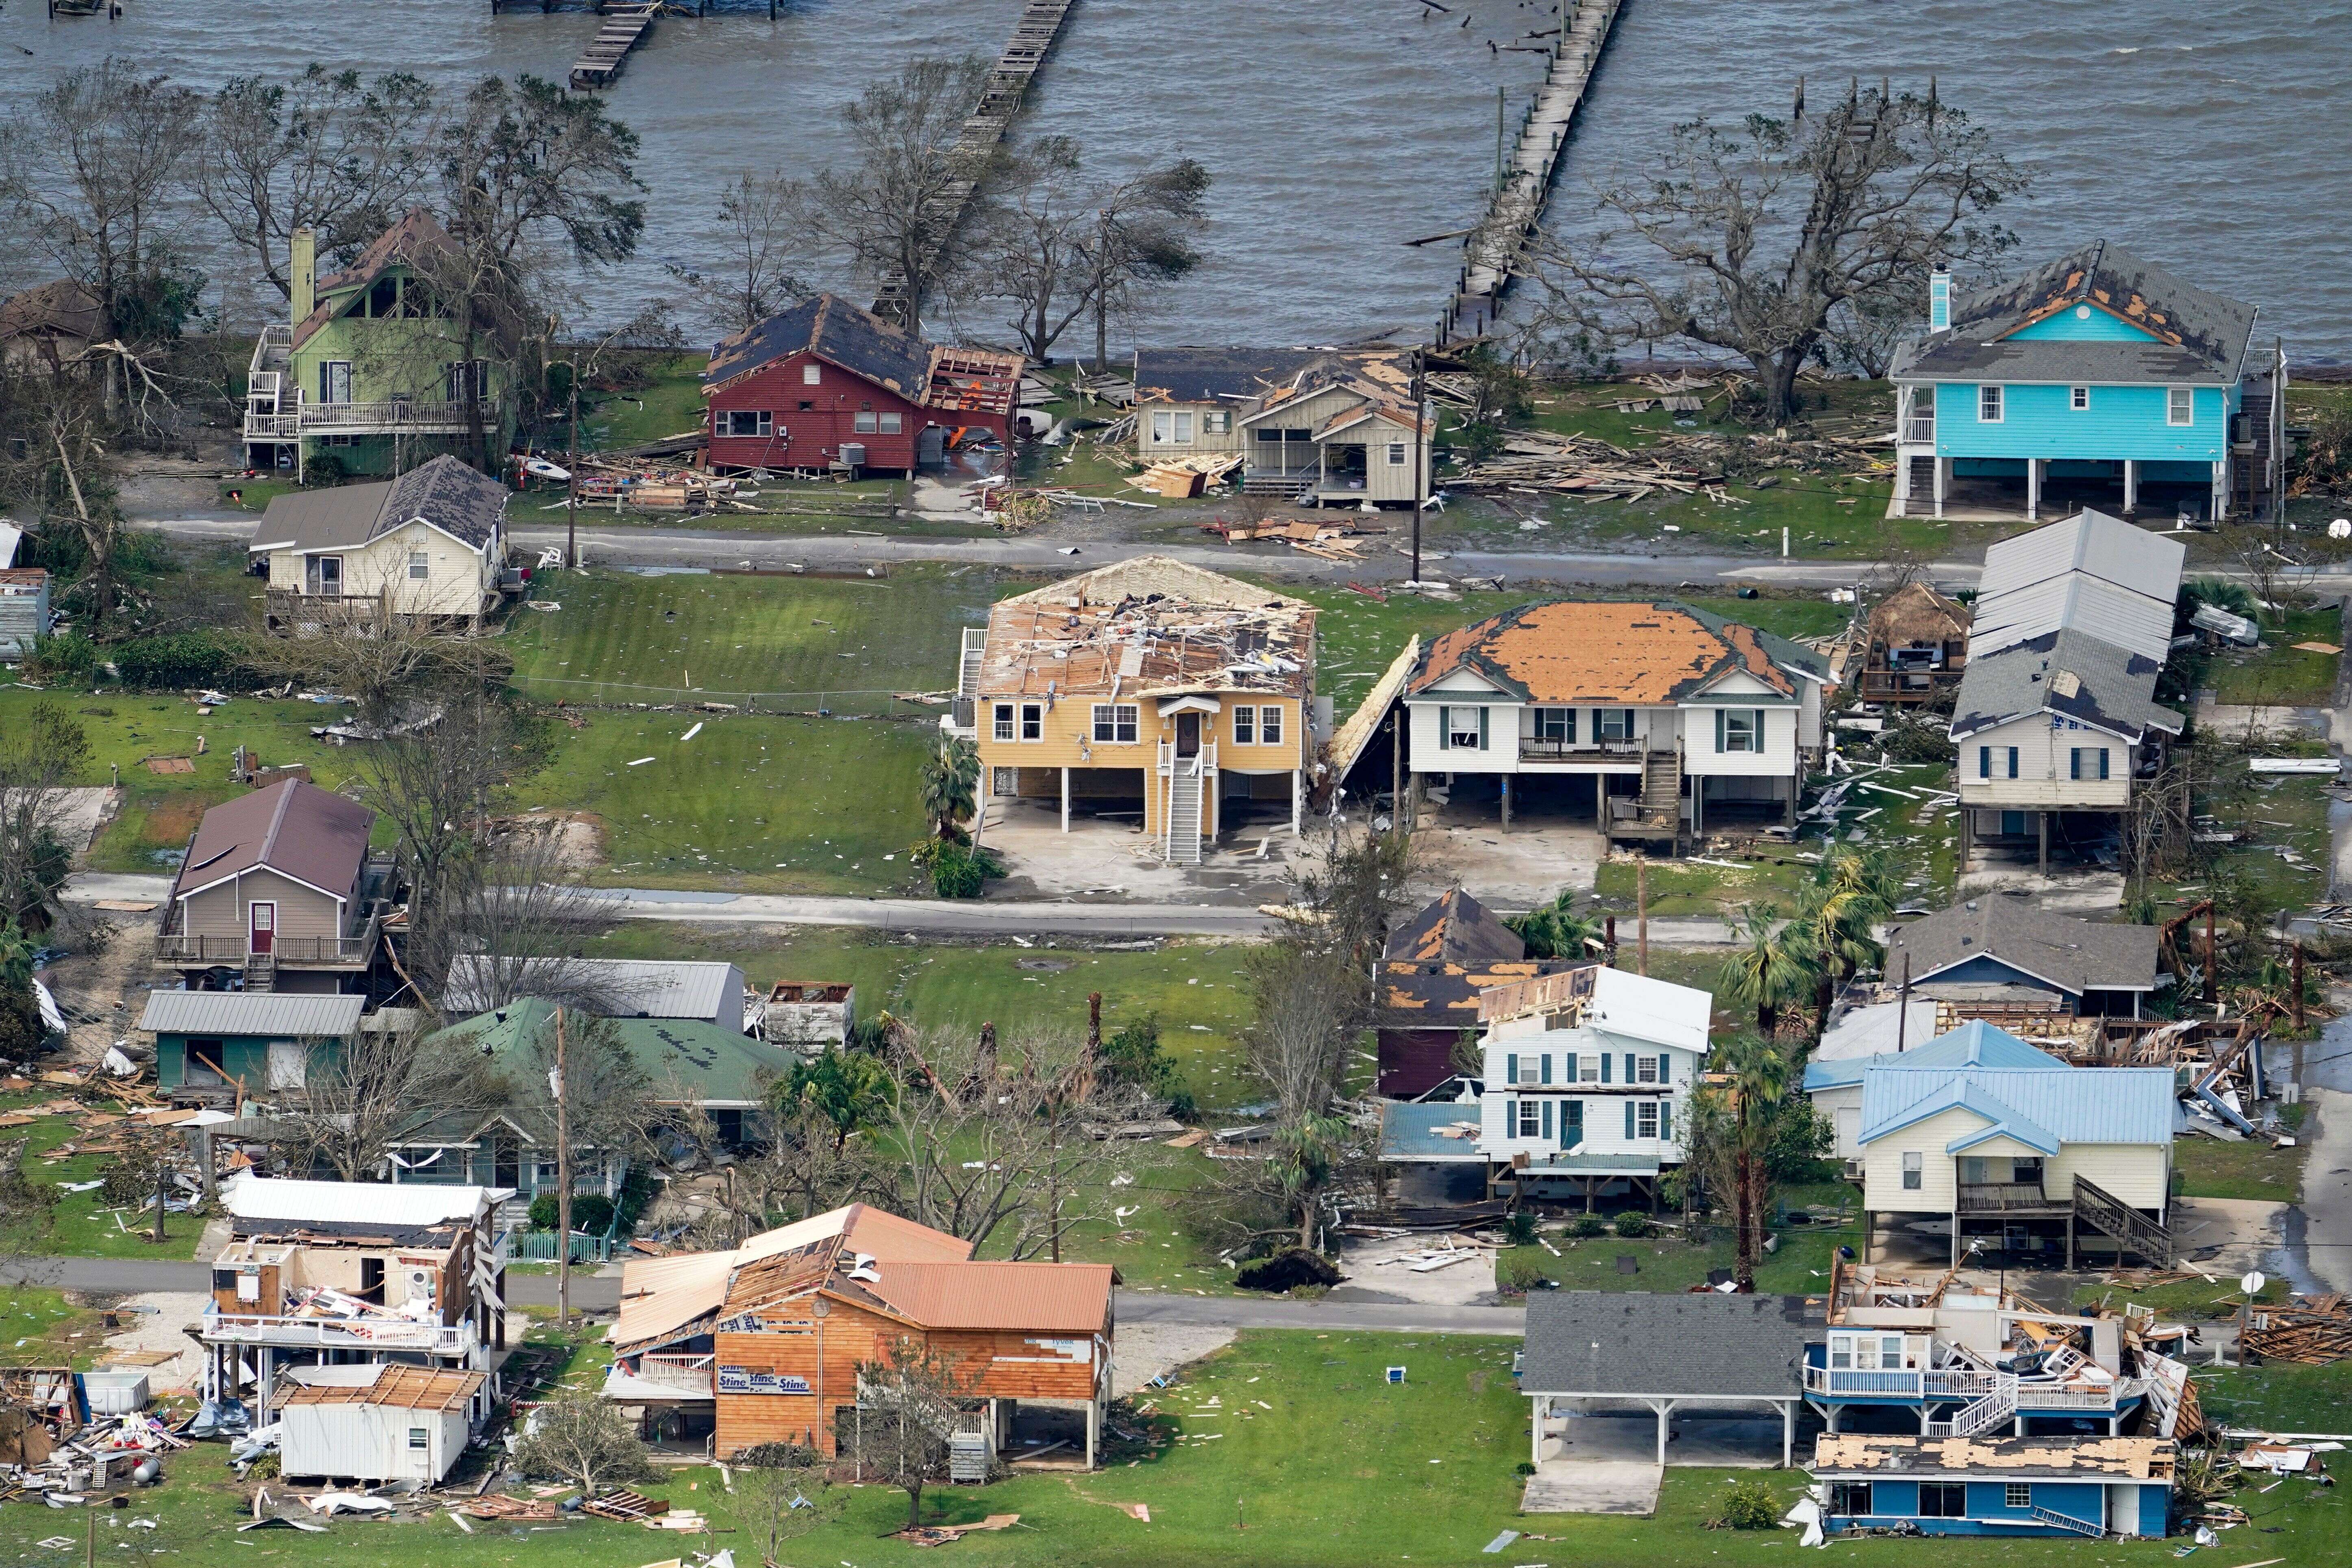 Buildings and homes are damaged in the aftermath of Hurricane Laura Thursday, Aug. 27, 2020, near Lake Charles, La. (AP Photo/David J. Phillip)